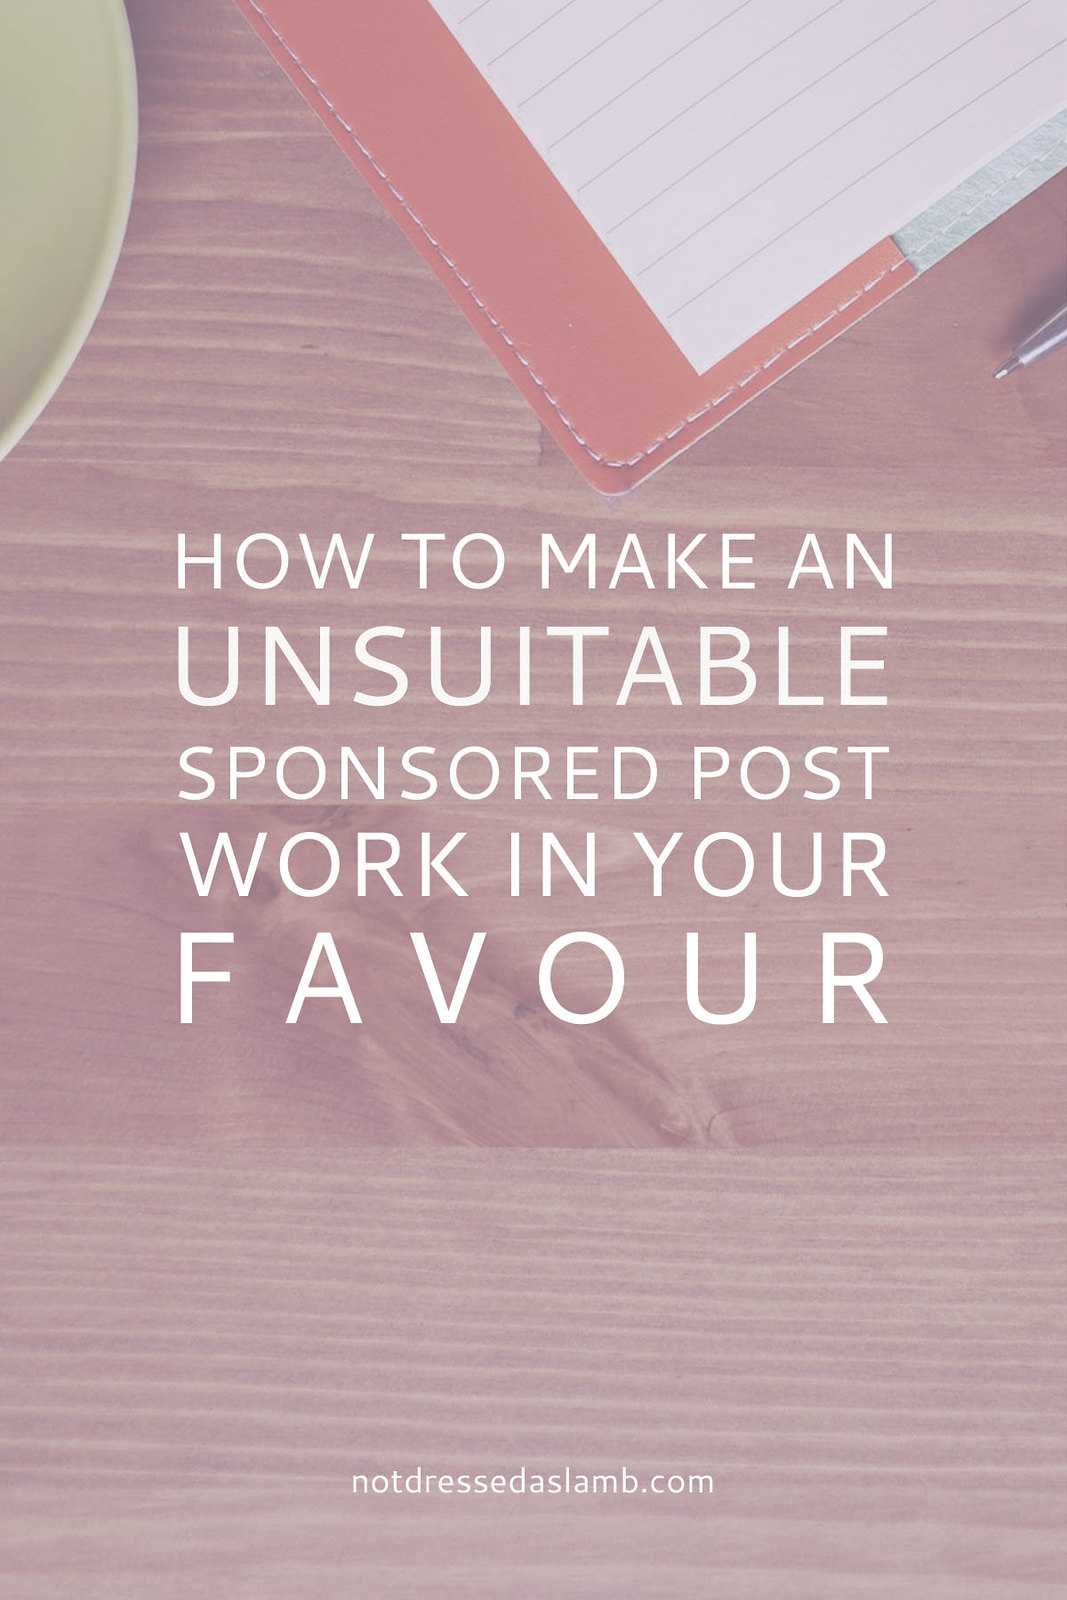 Blogging Tips | How to Make an Unsuitable Sponsored Post Work in Your Favour